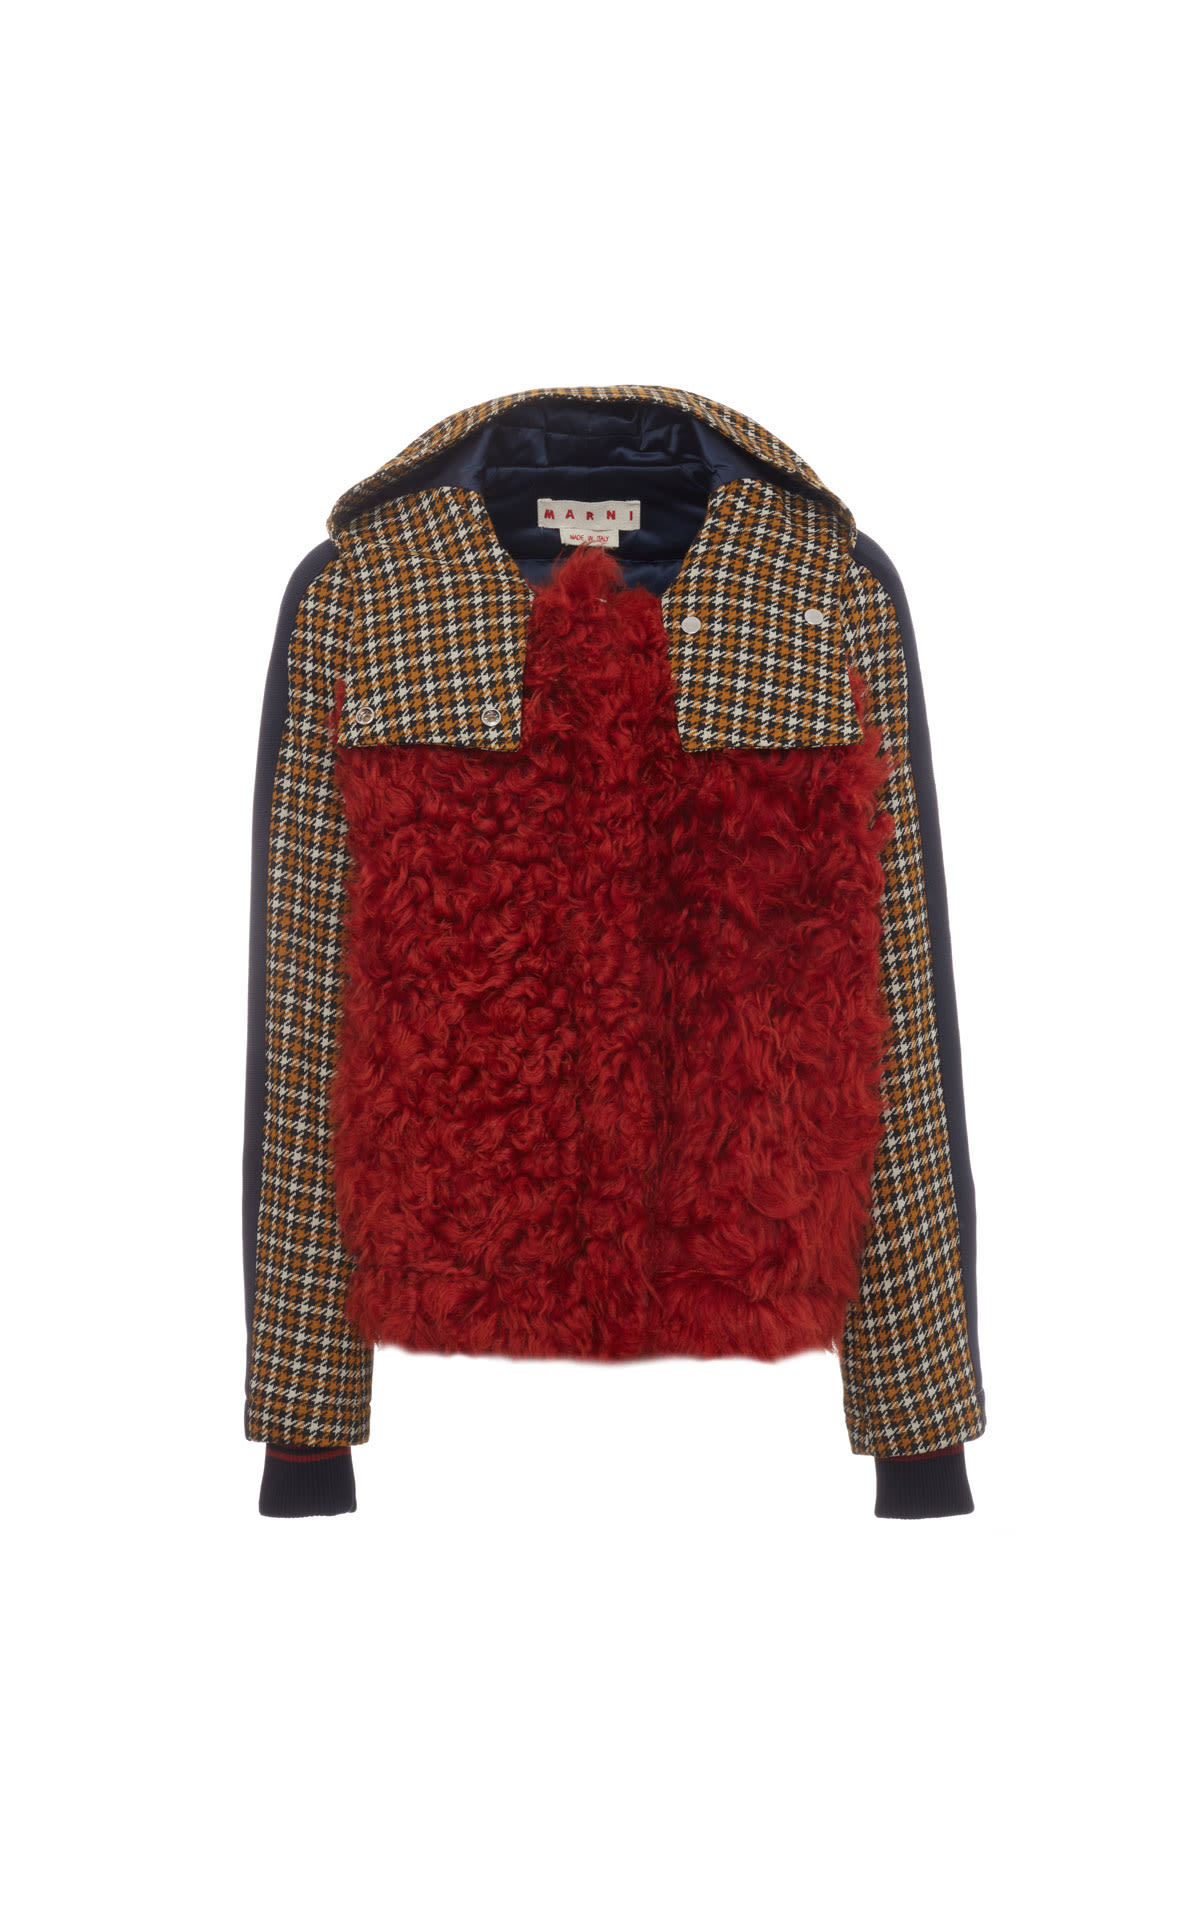 Marni Shearling jacket from Bicester Village